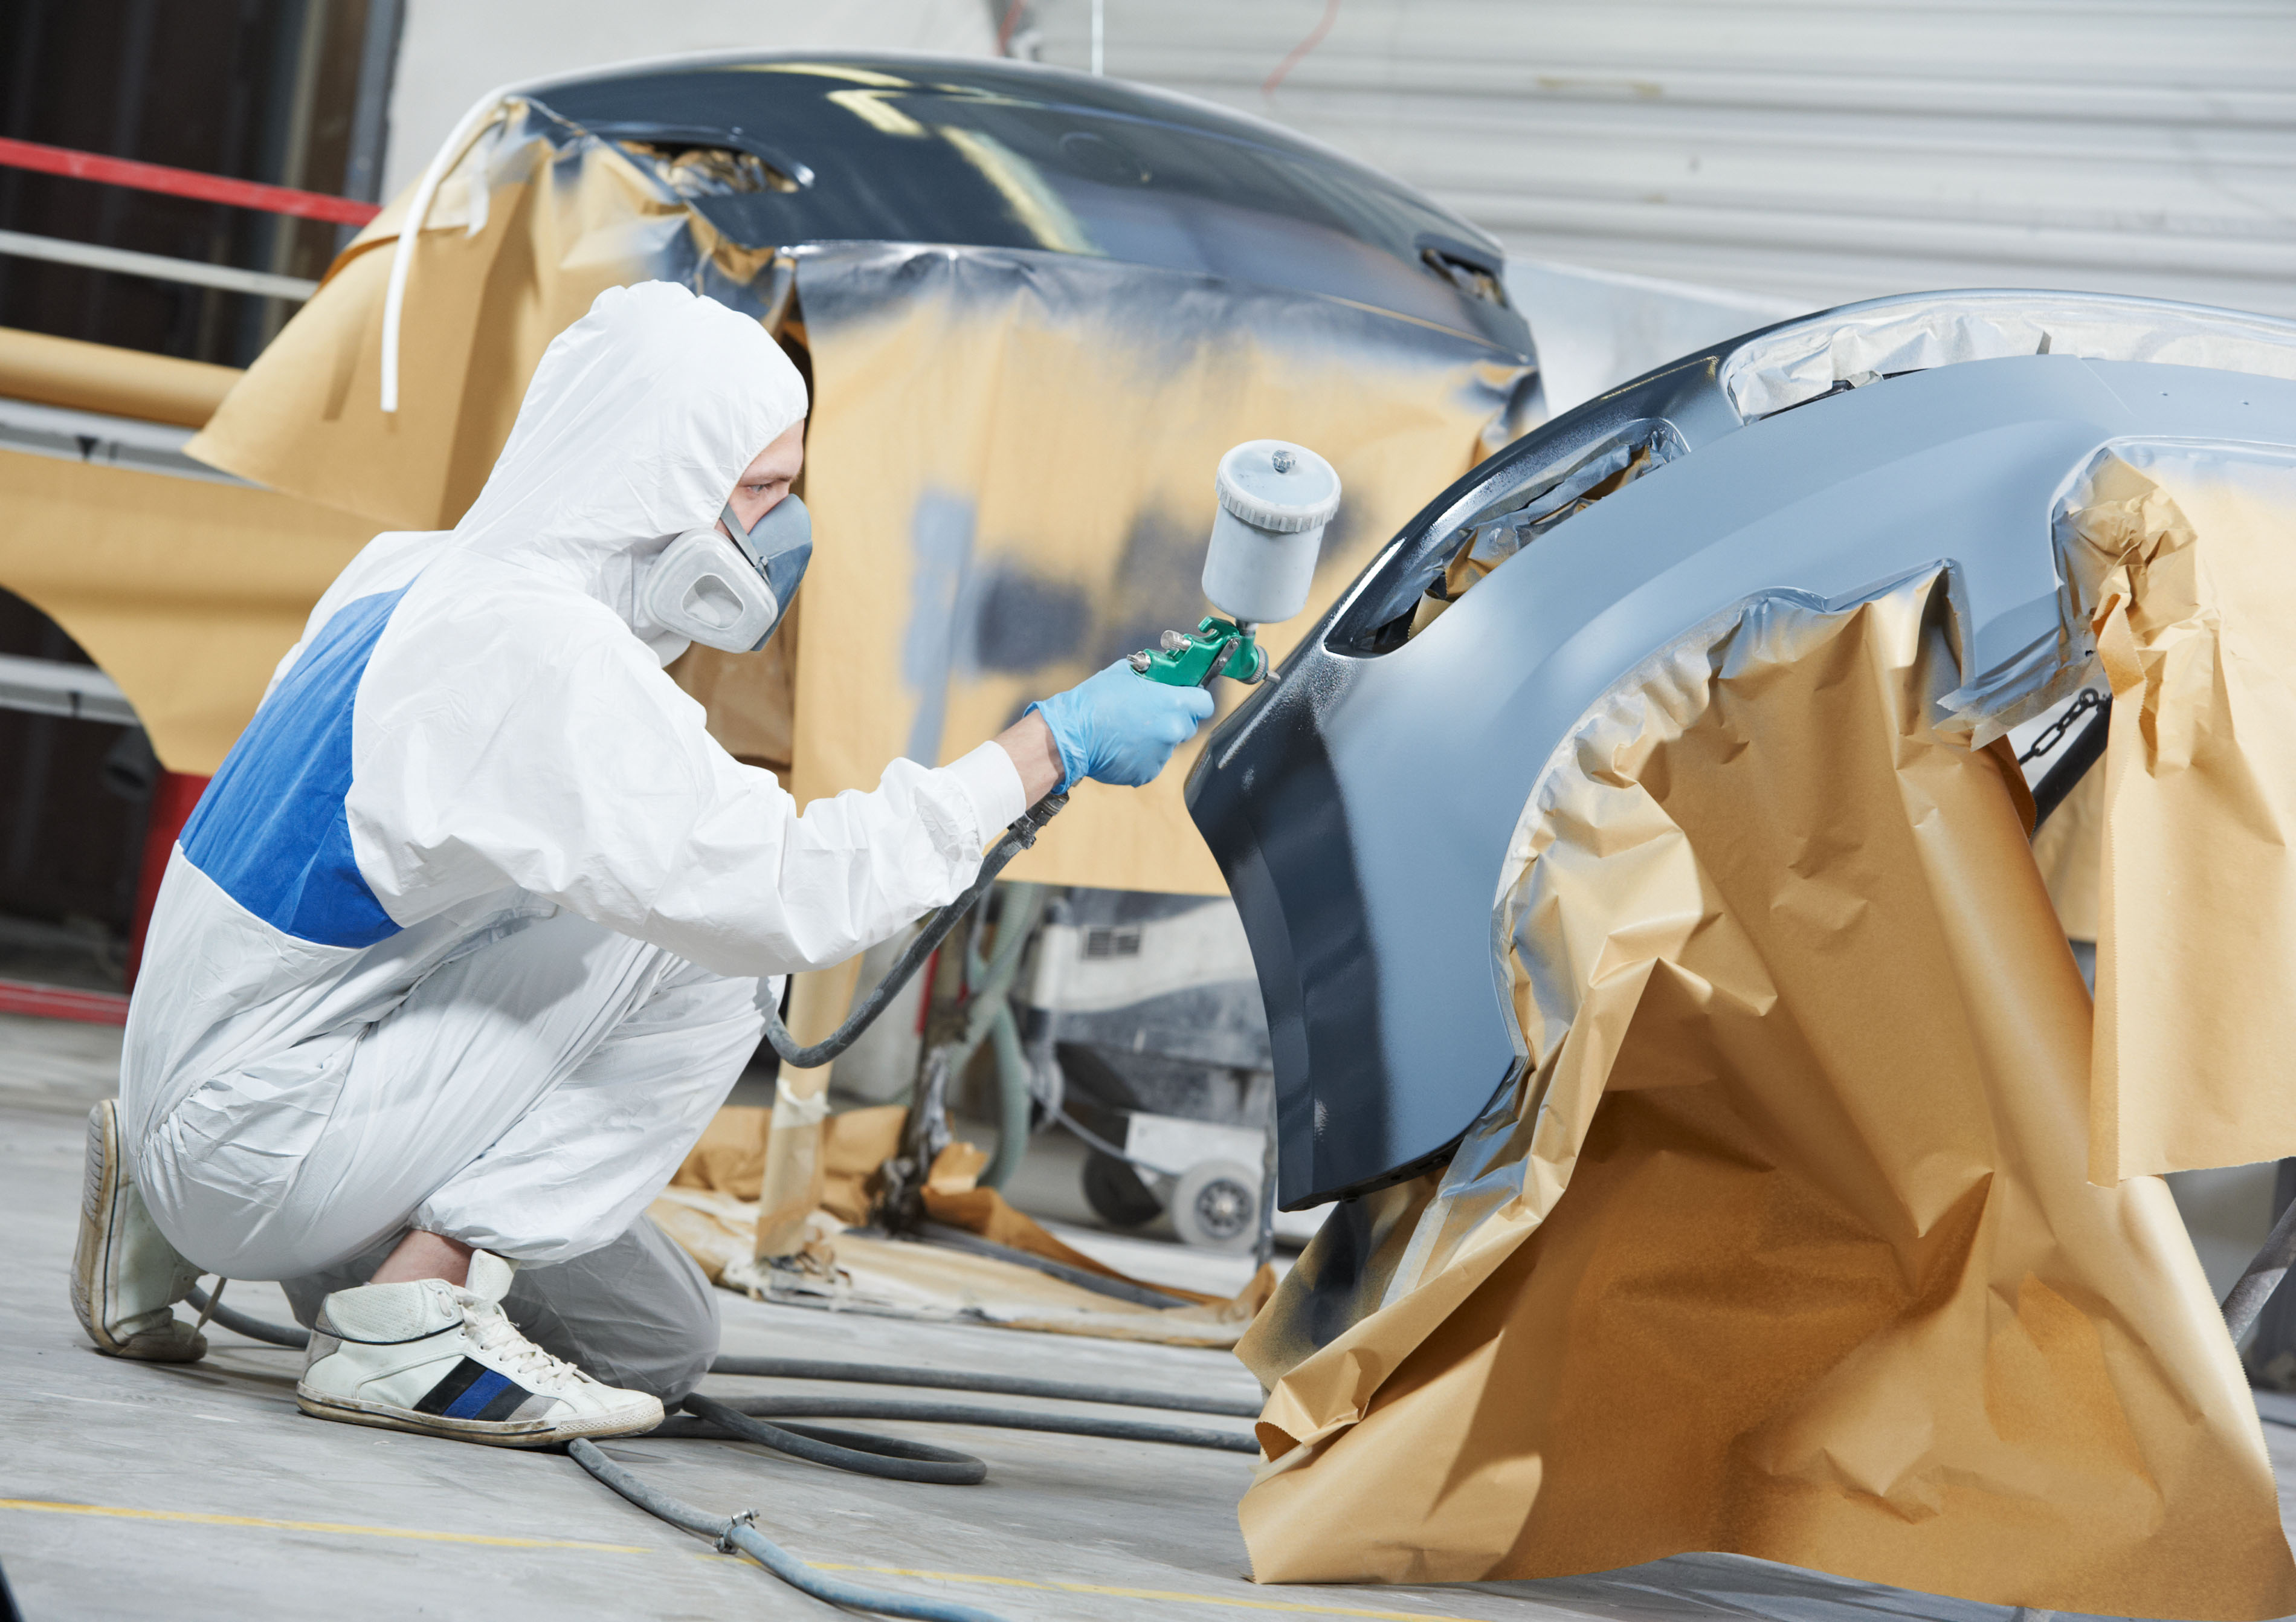 An image of an Auto Mechanic Worker spraying painting various car pieces.